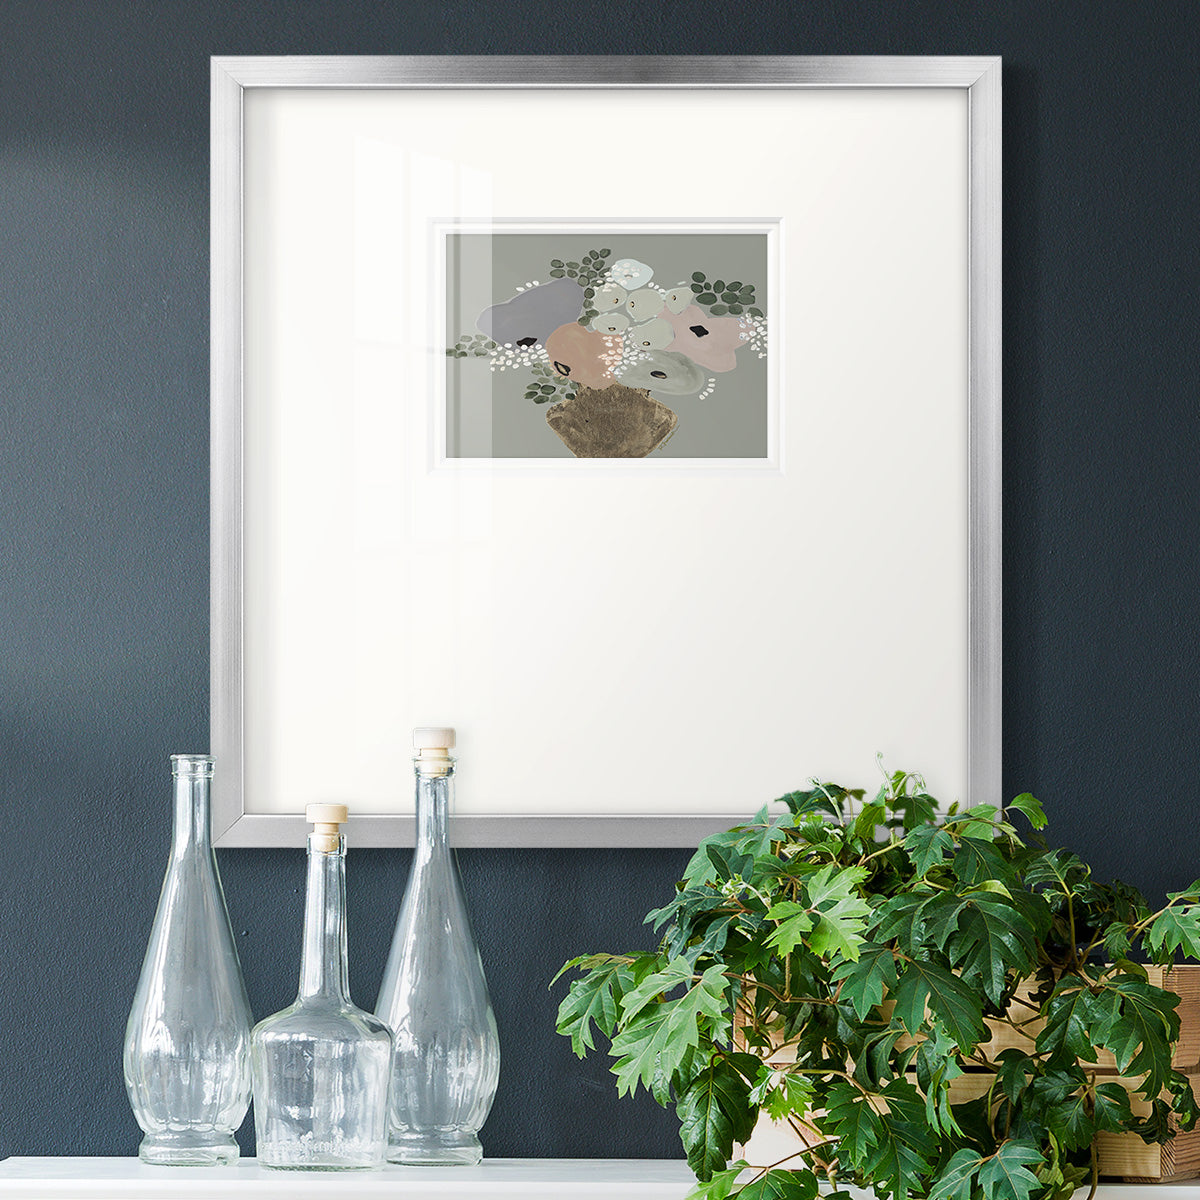 You are on My Mind Premium Framed Print Double Matboard